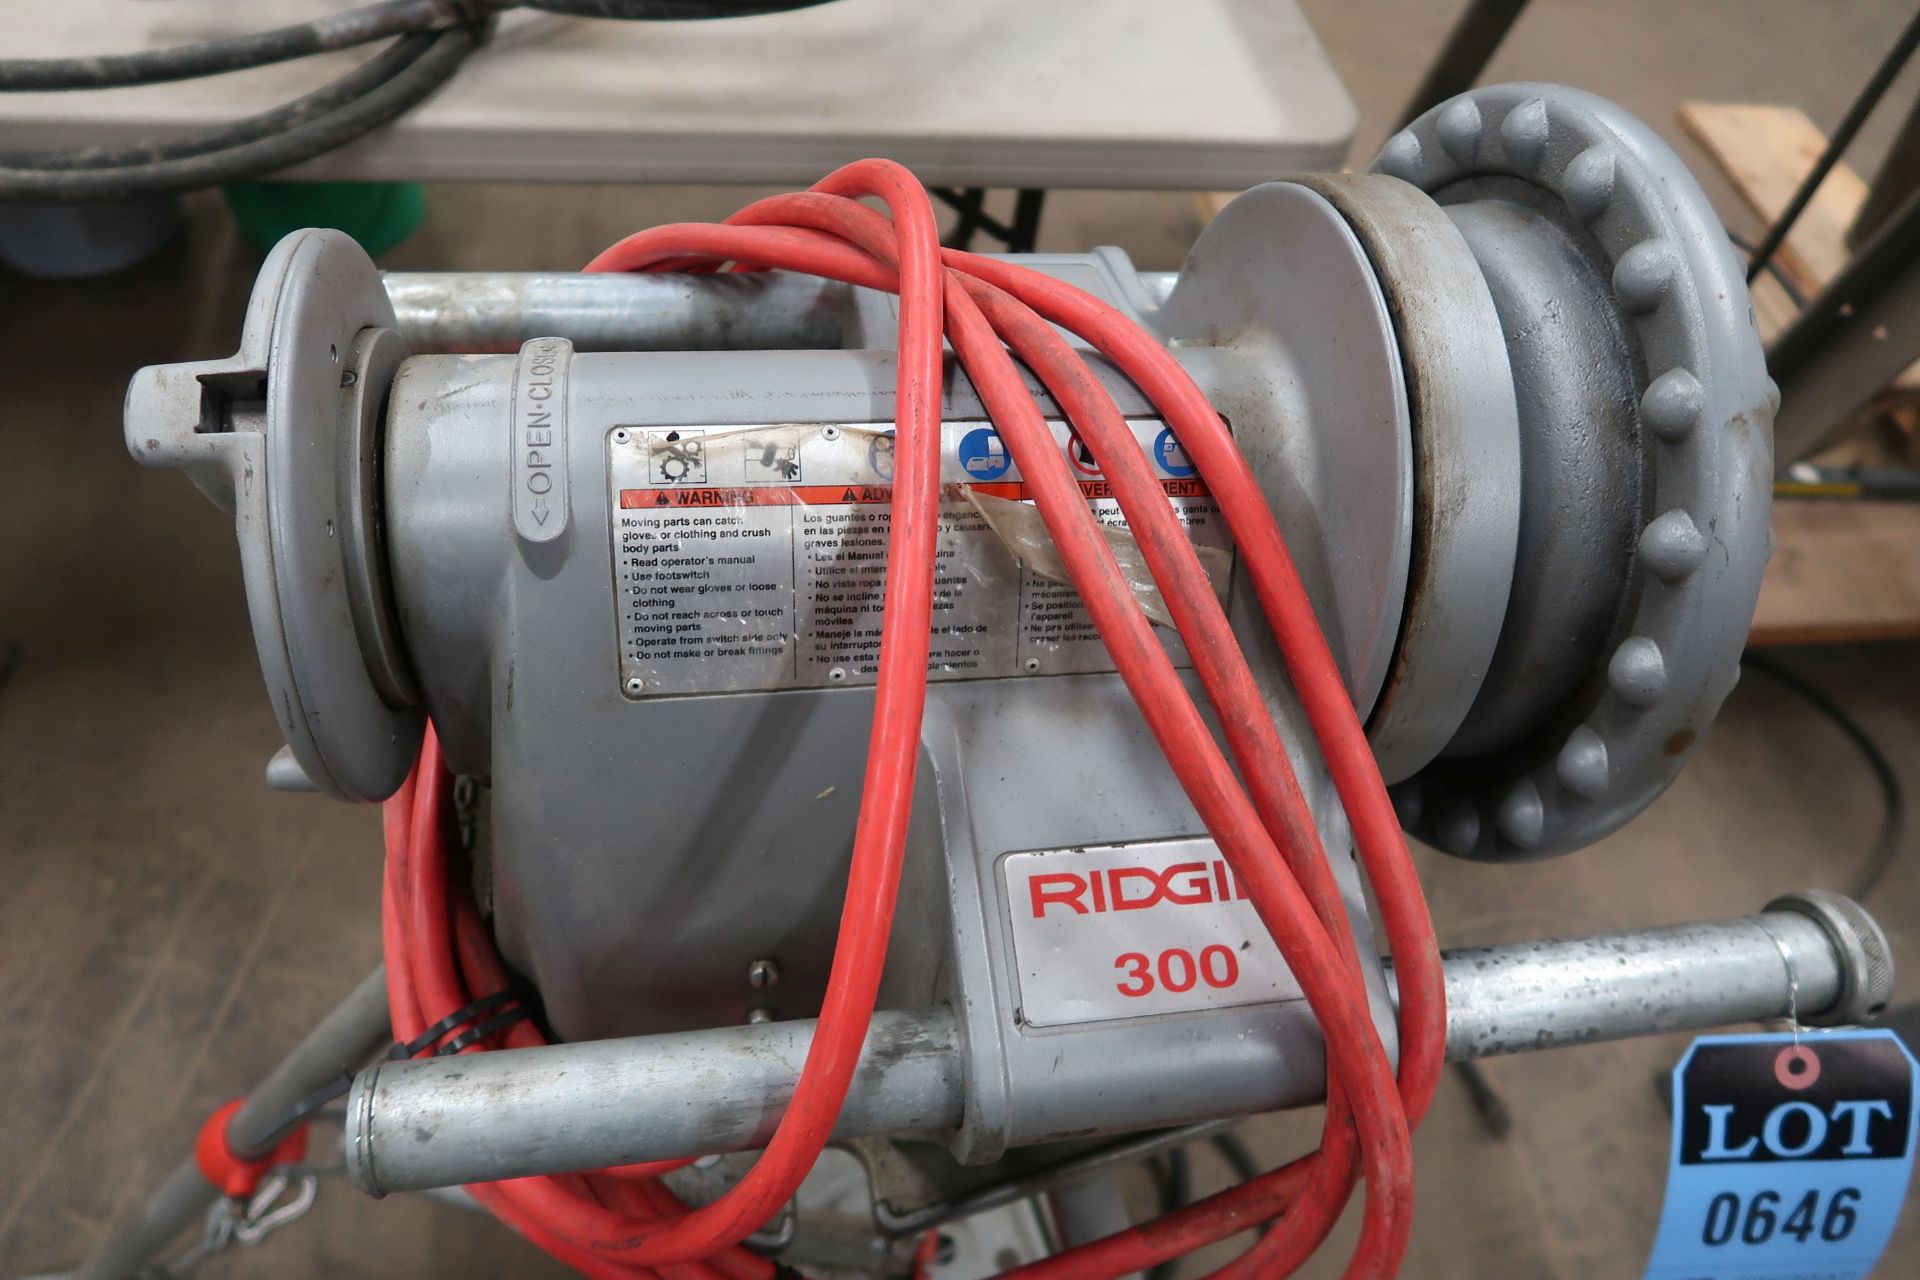 RIDGID 300 ELECTRIC PIPE THREADER WITH OIL PAN - Image 3 of 7